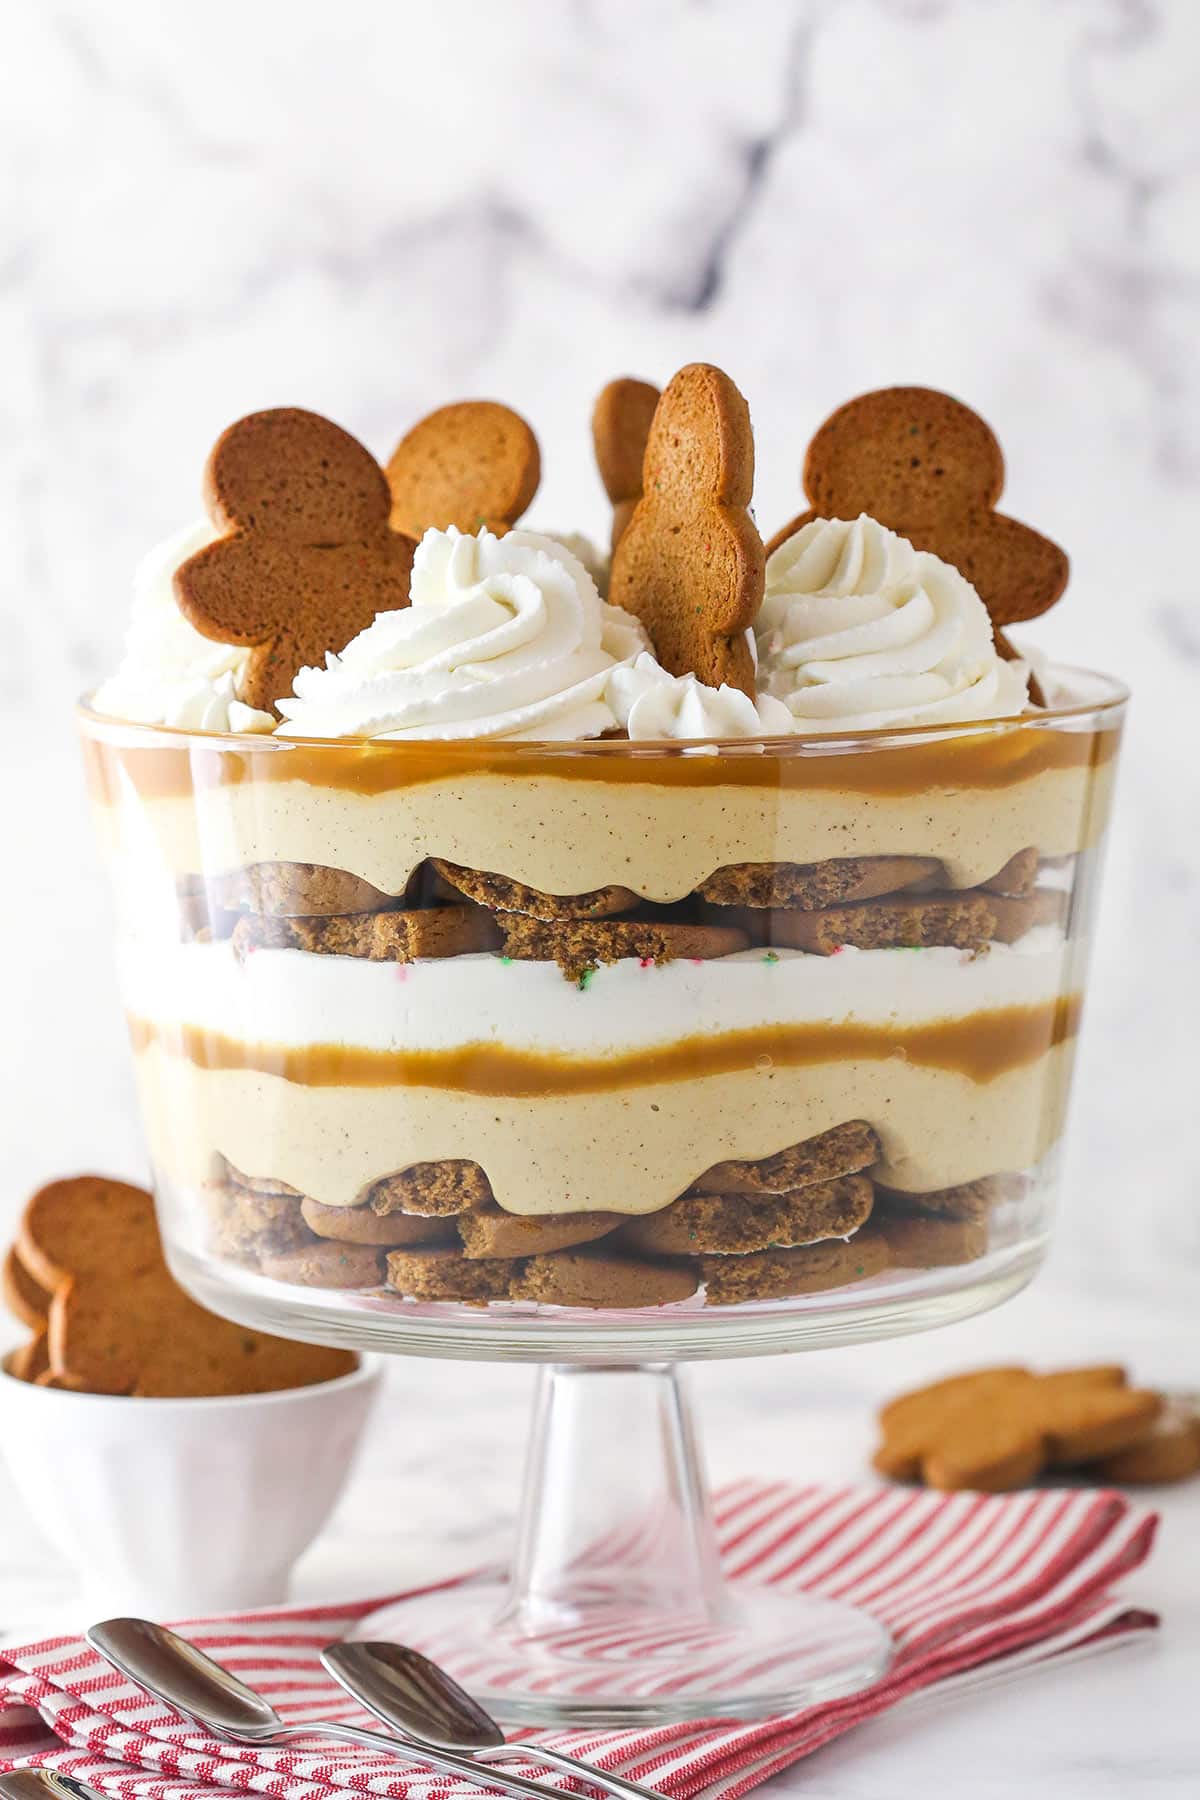 A Gingerbread Cheesecake Trifle in a trifle bowl on a striped napkin.